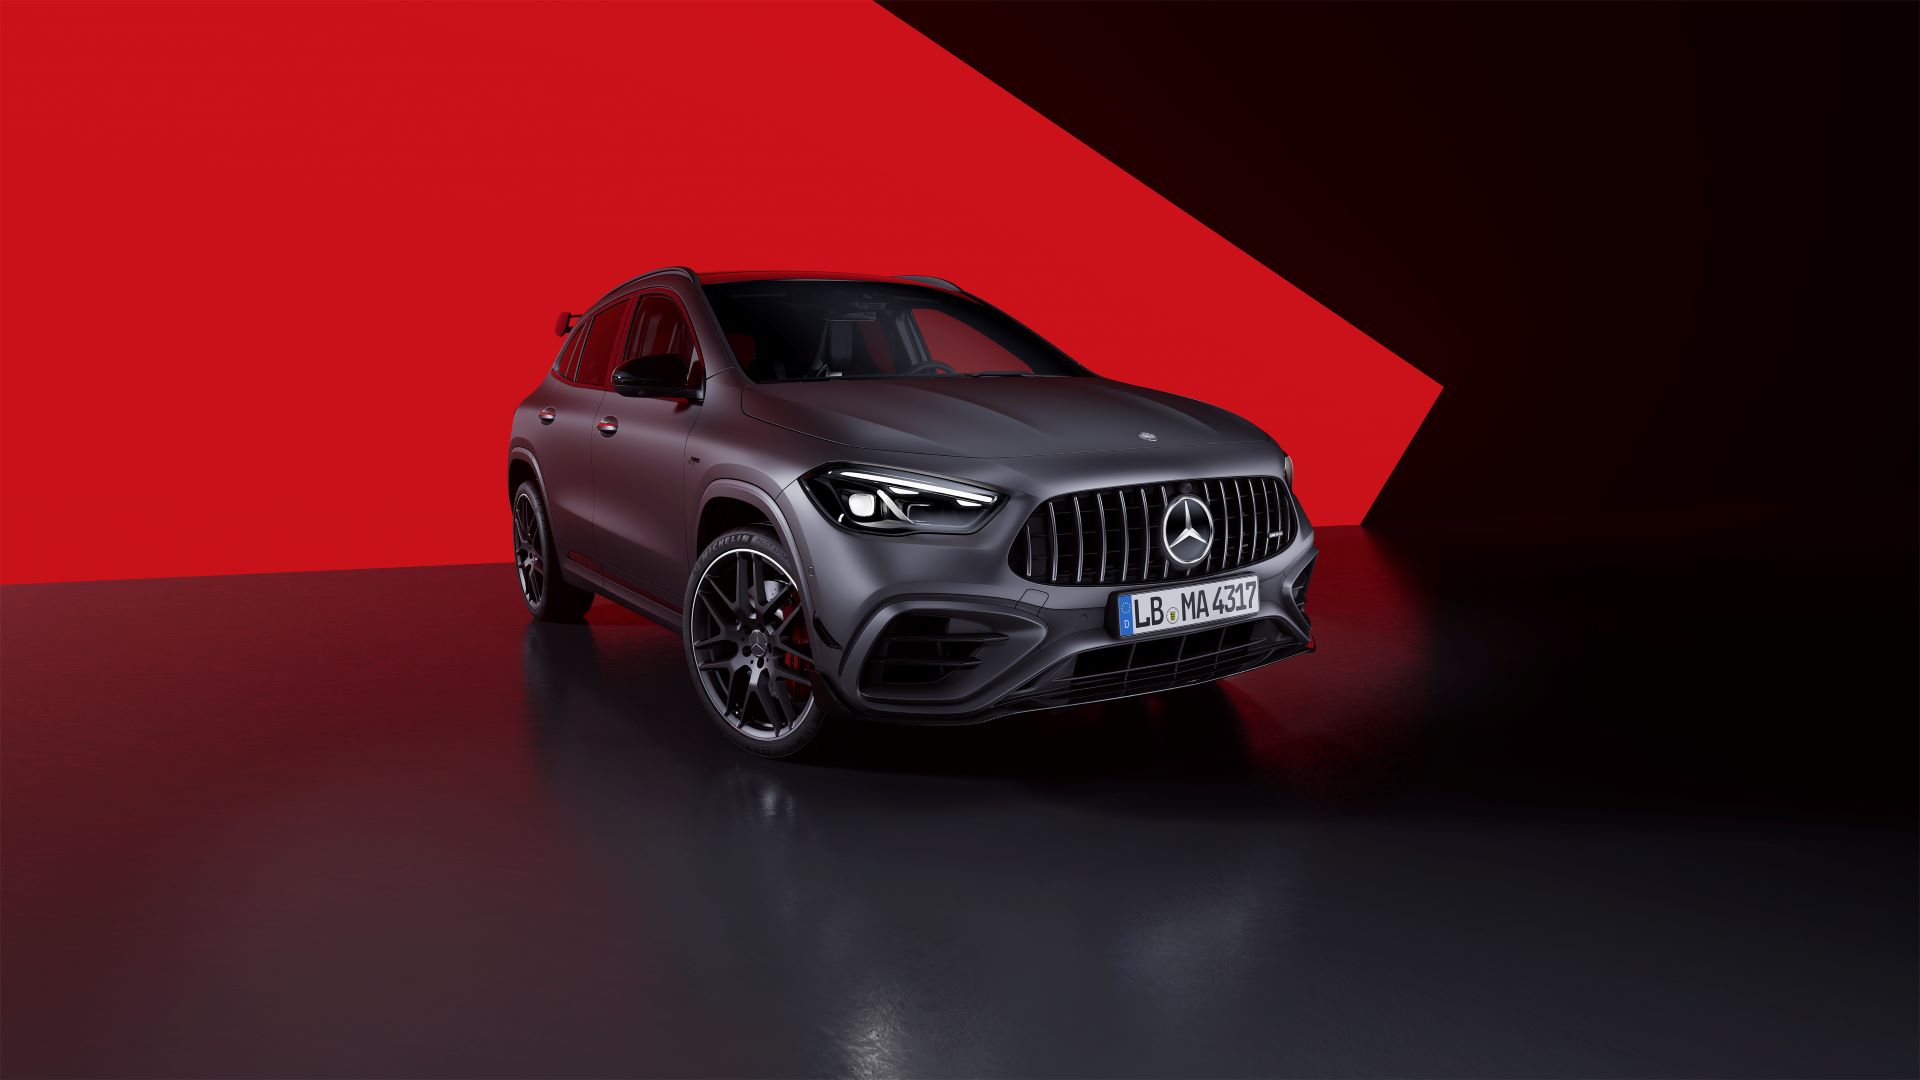 Mercedes Amg Gives Top Model Of Its Compact Performance Suv Family An Extensive Upgrade